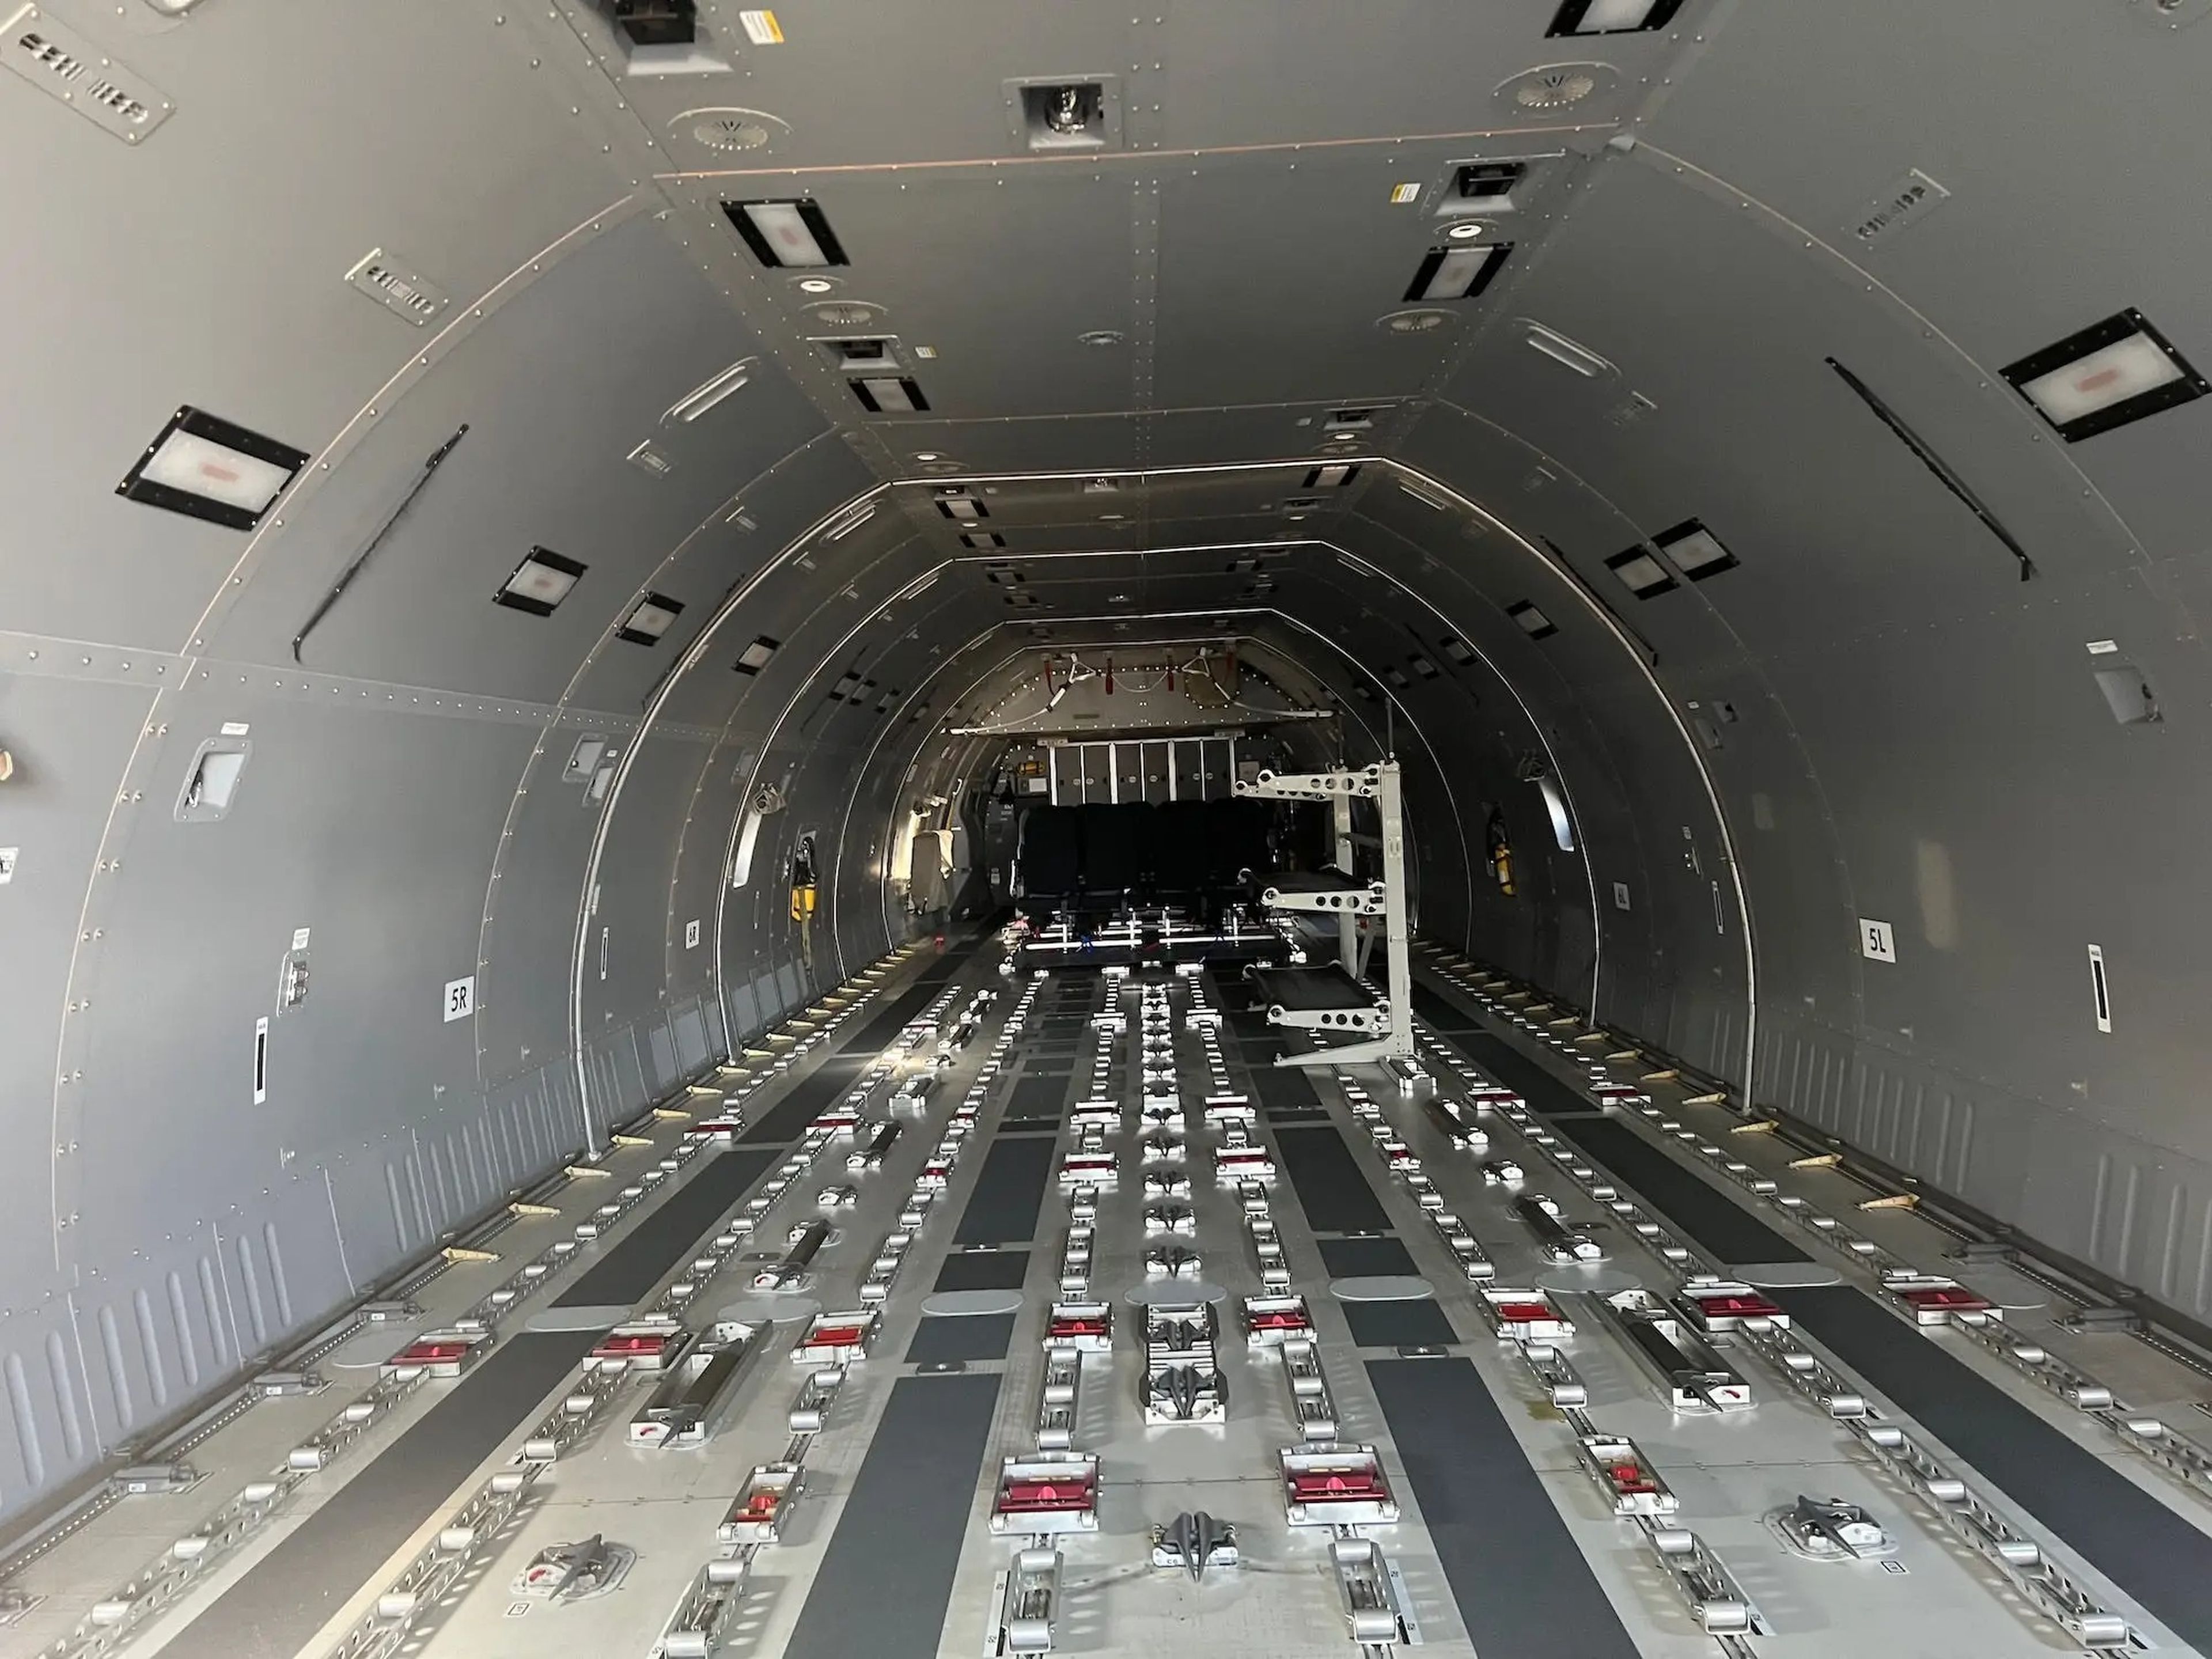 Looking down the cabin towards the back of the jet.